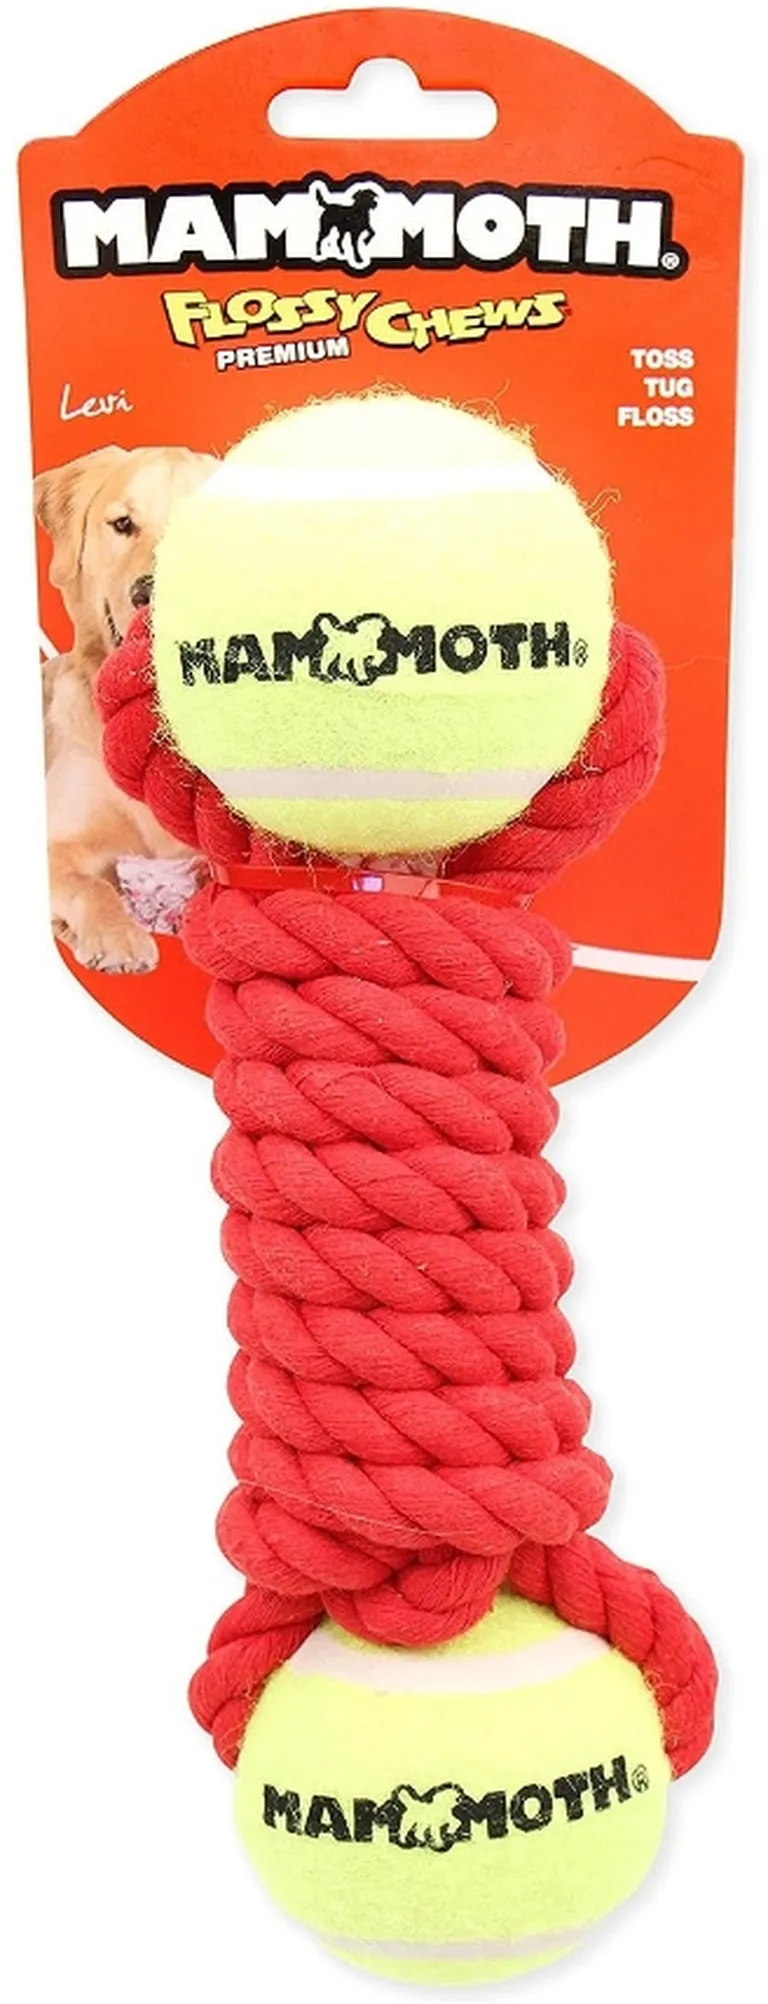 Mammoth Flossy Chews Braided Bone with 2 Tennis Balls for Dogs Photo 1